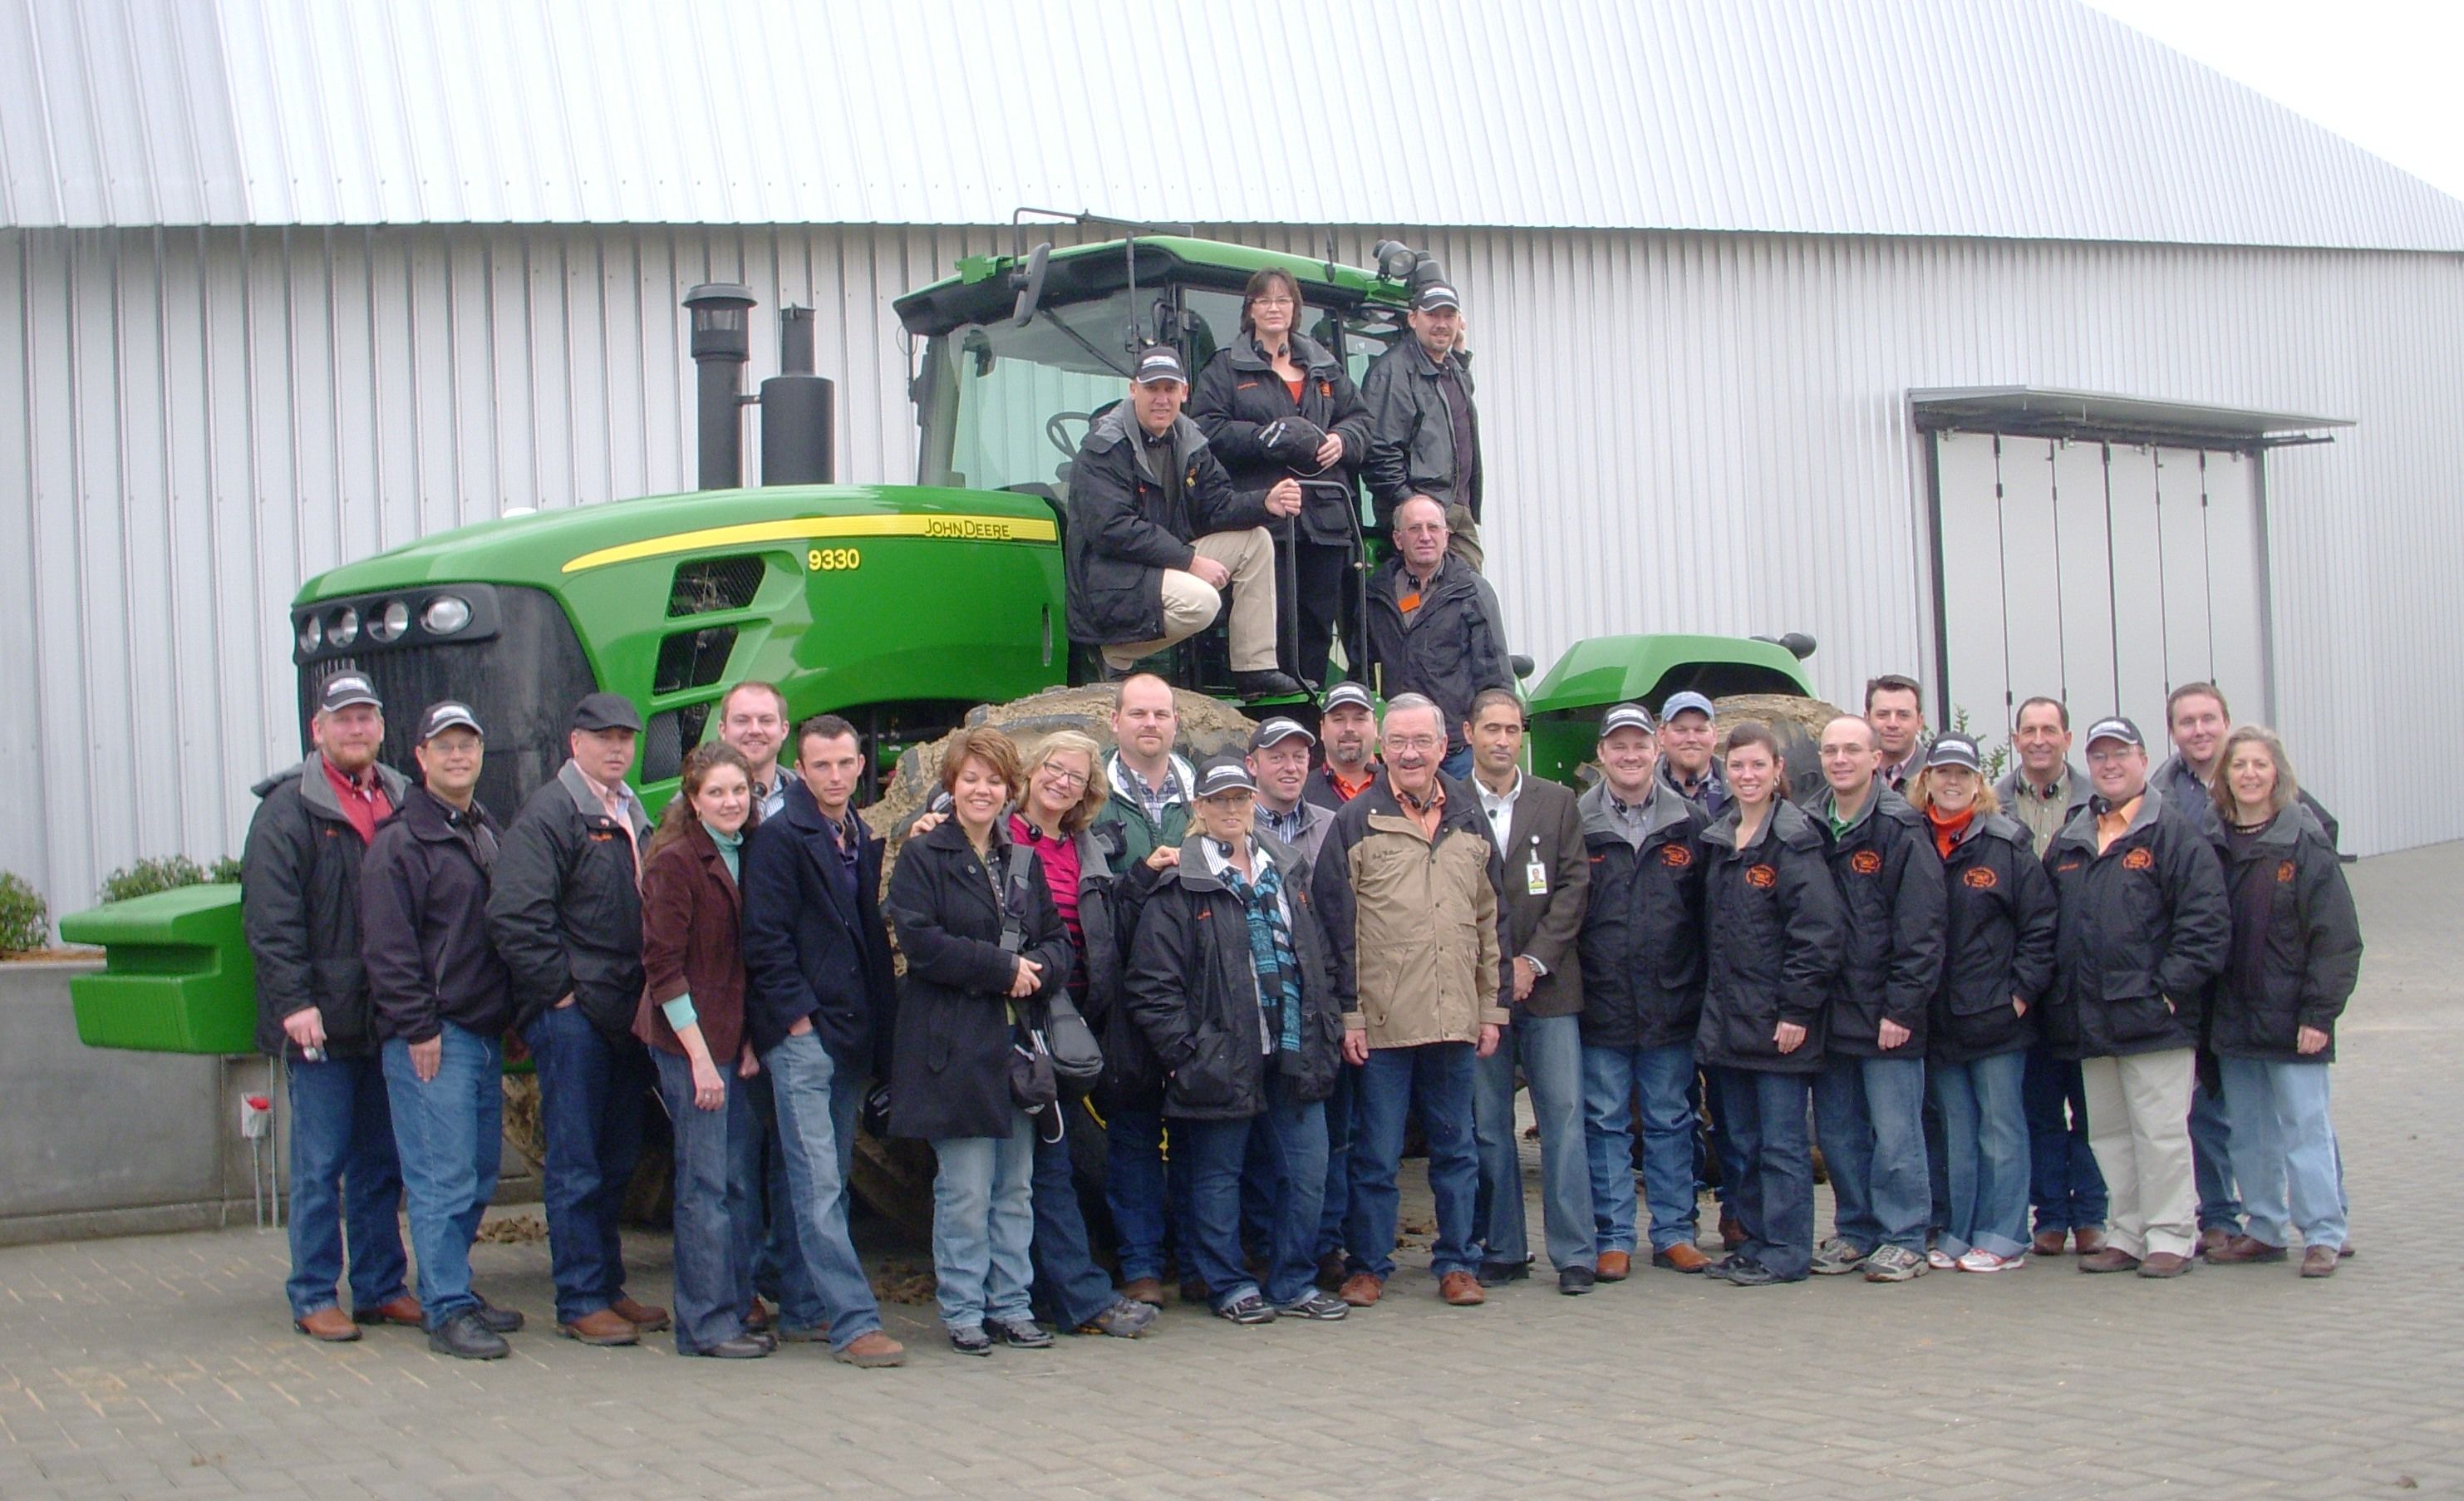 The Rain in Spain Continues- But Spirits of Class 14 Continue High as They See John Deere European Training Facility